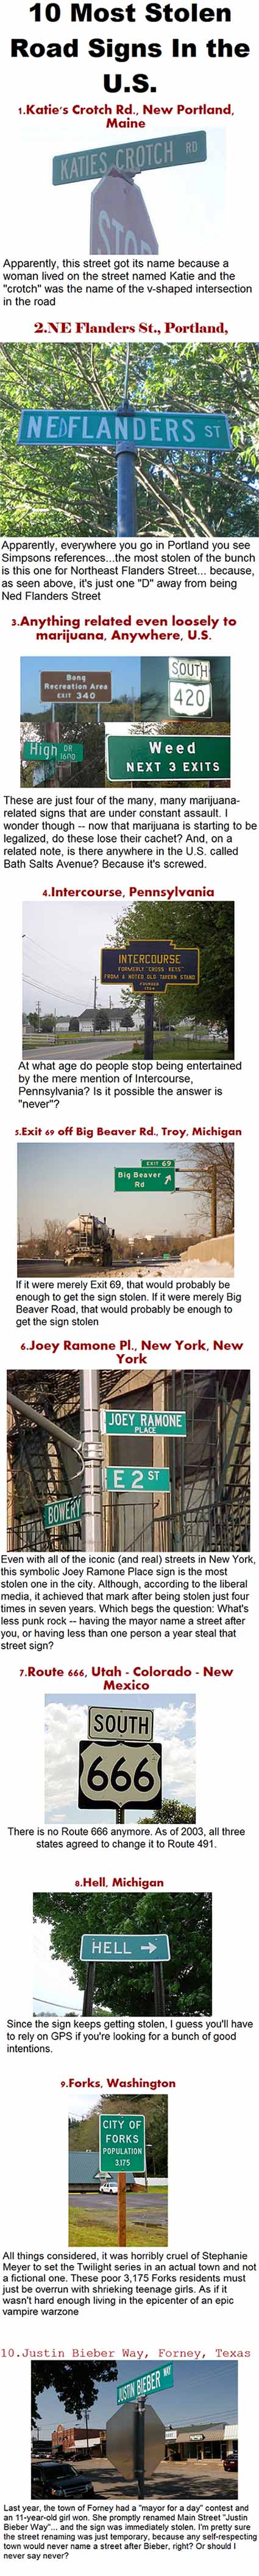 10 most stolen road signs in the u.s. - meme